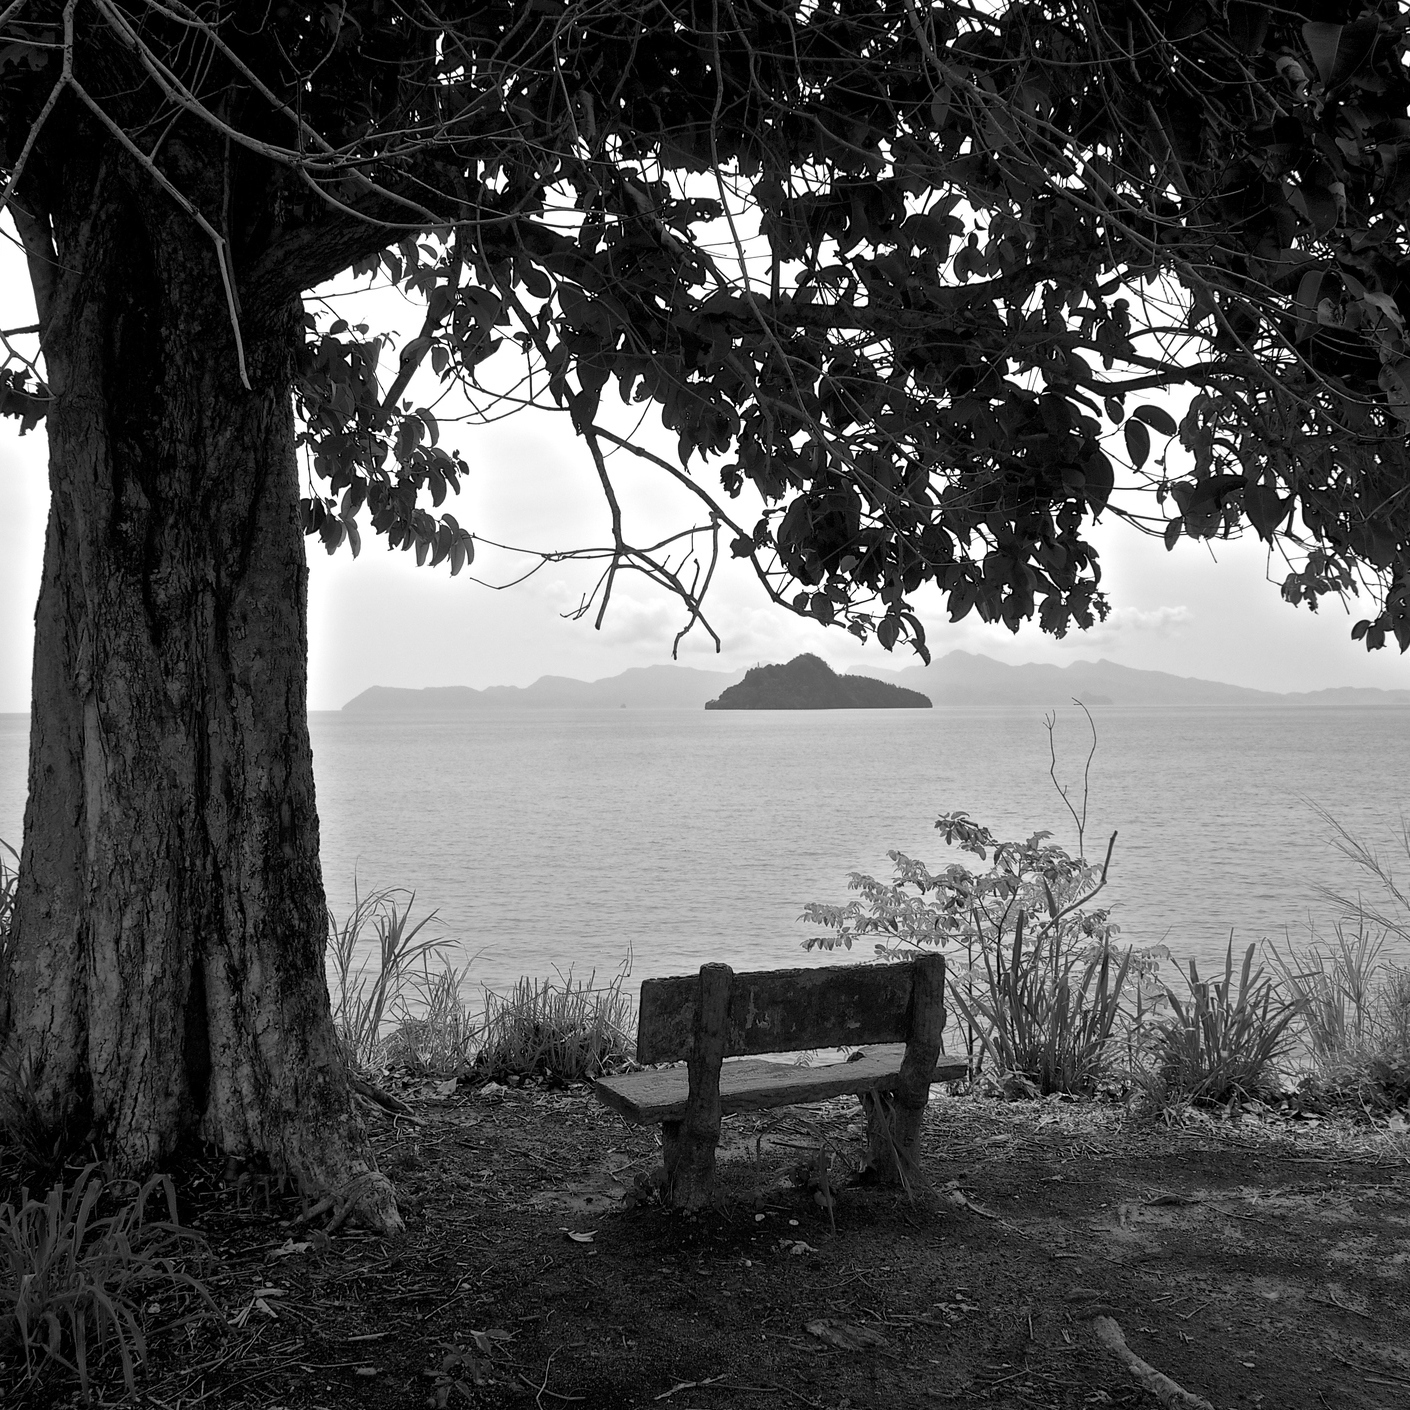 Bench under a tree by a lake, black-and-white photo.